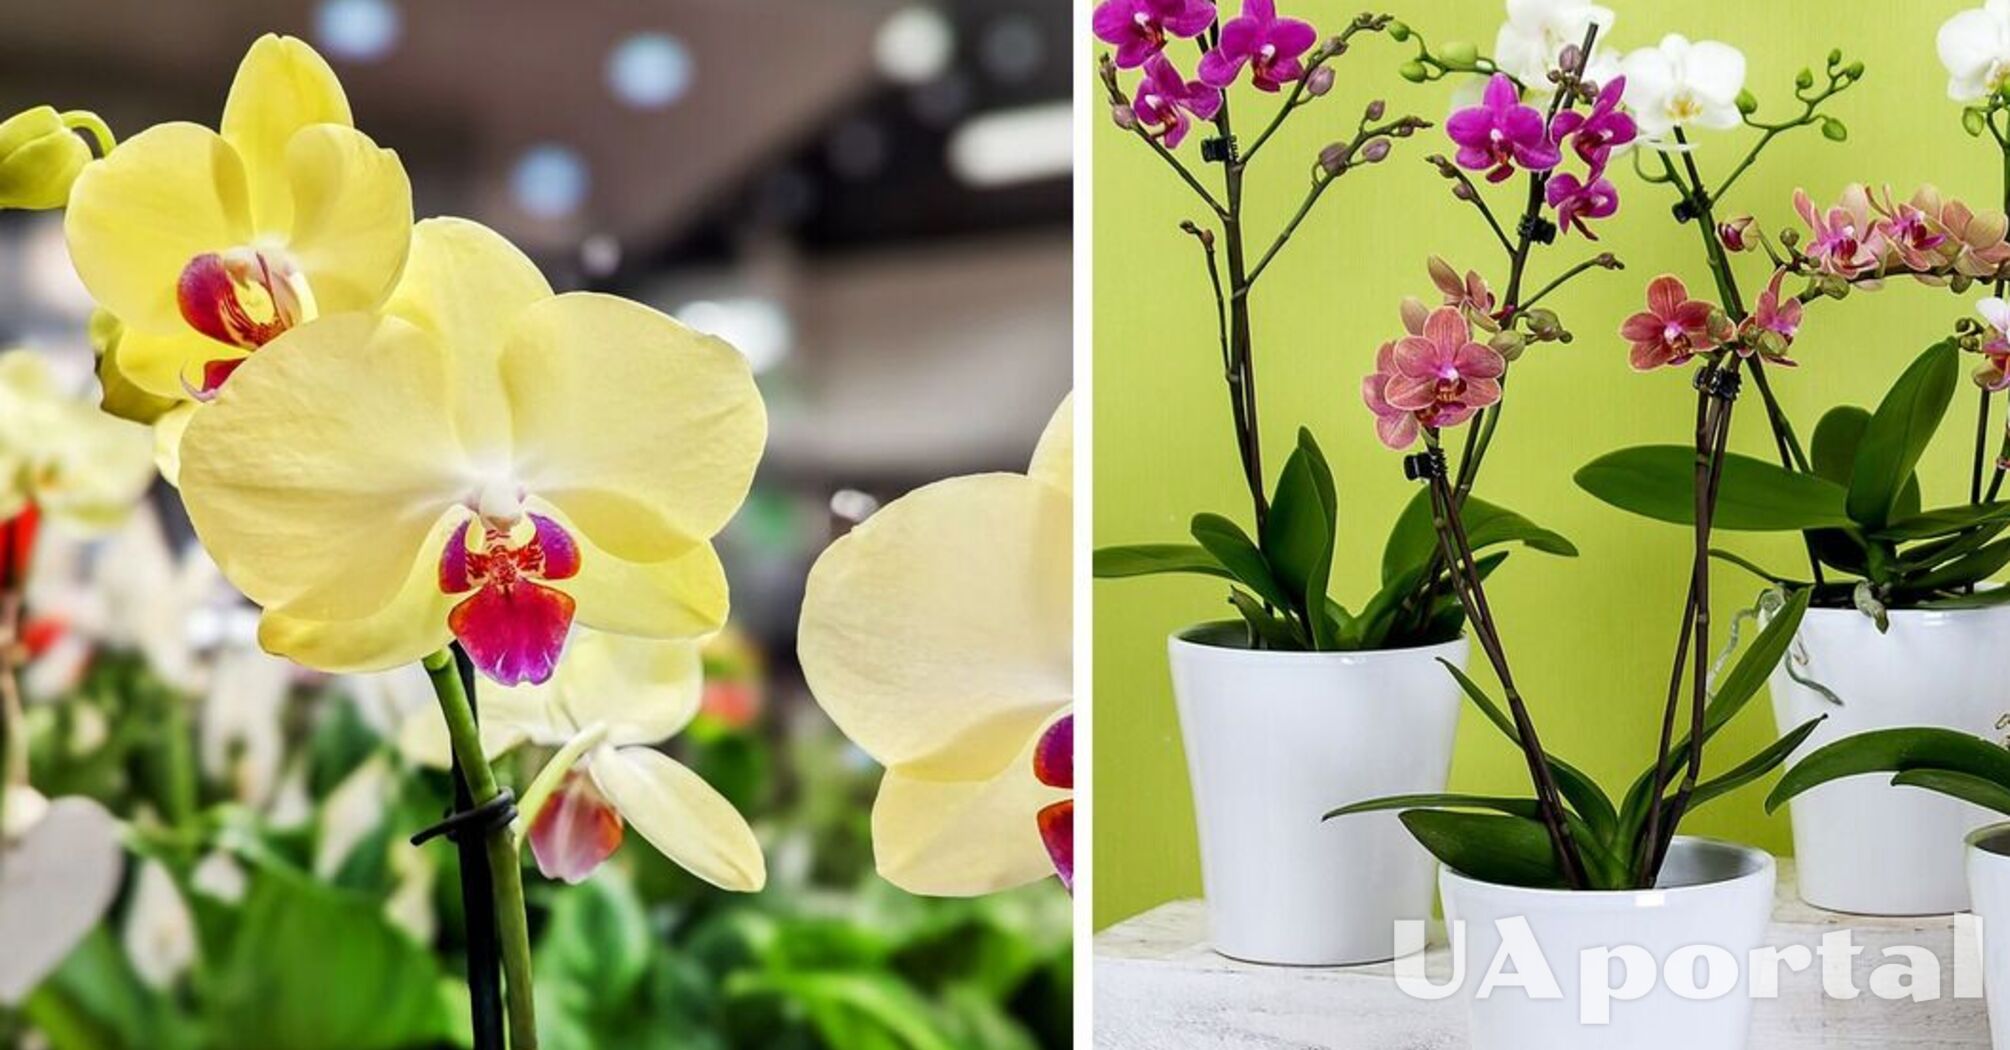 Experts named four basic rules for orchid care: how to make the plant bloom again